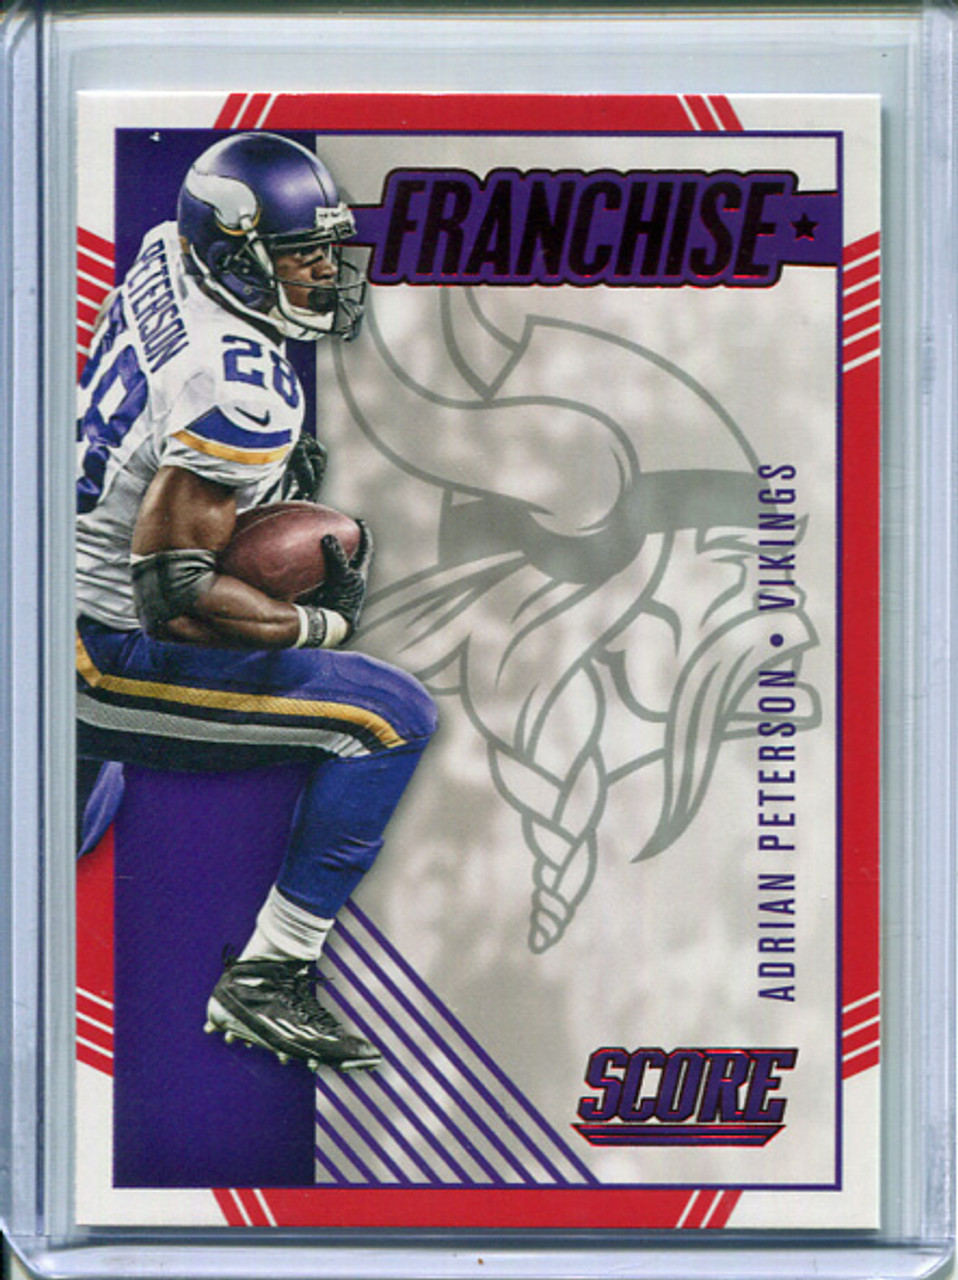 Adrian Peterson 2016 Score, Franchise #24 Red